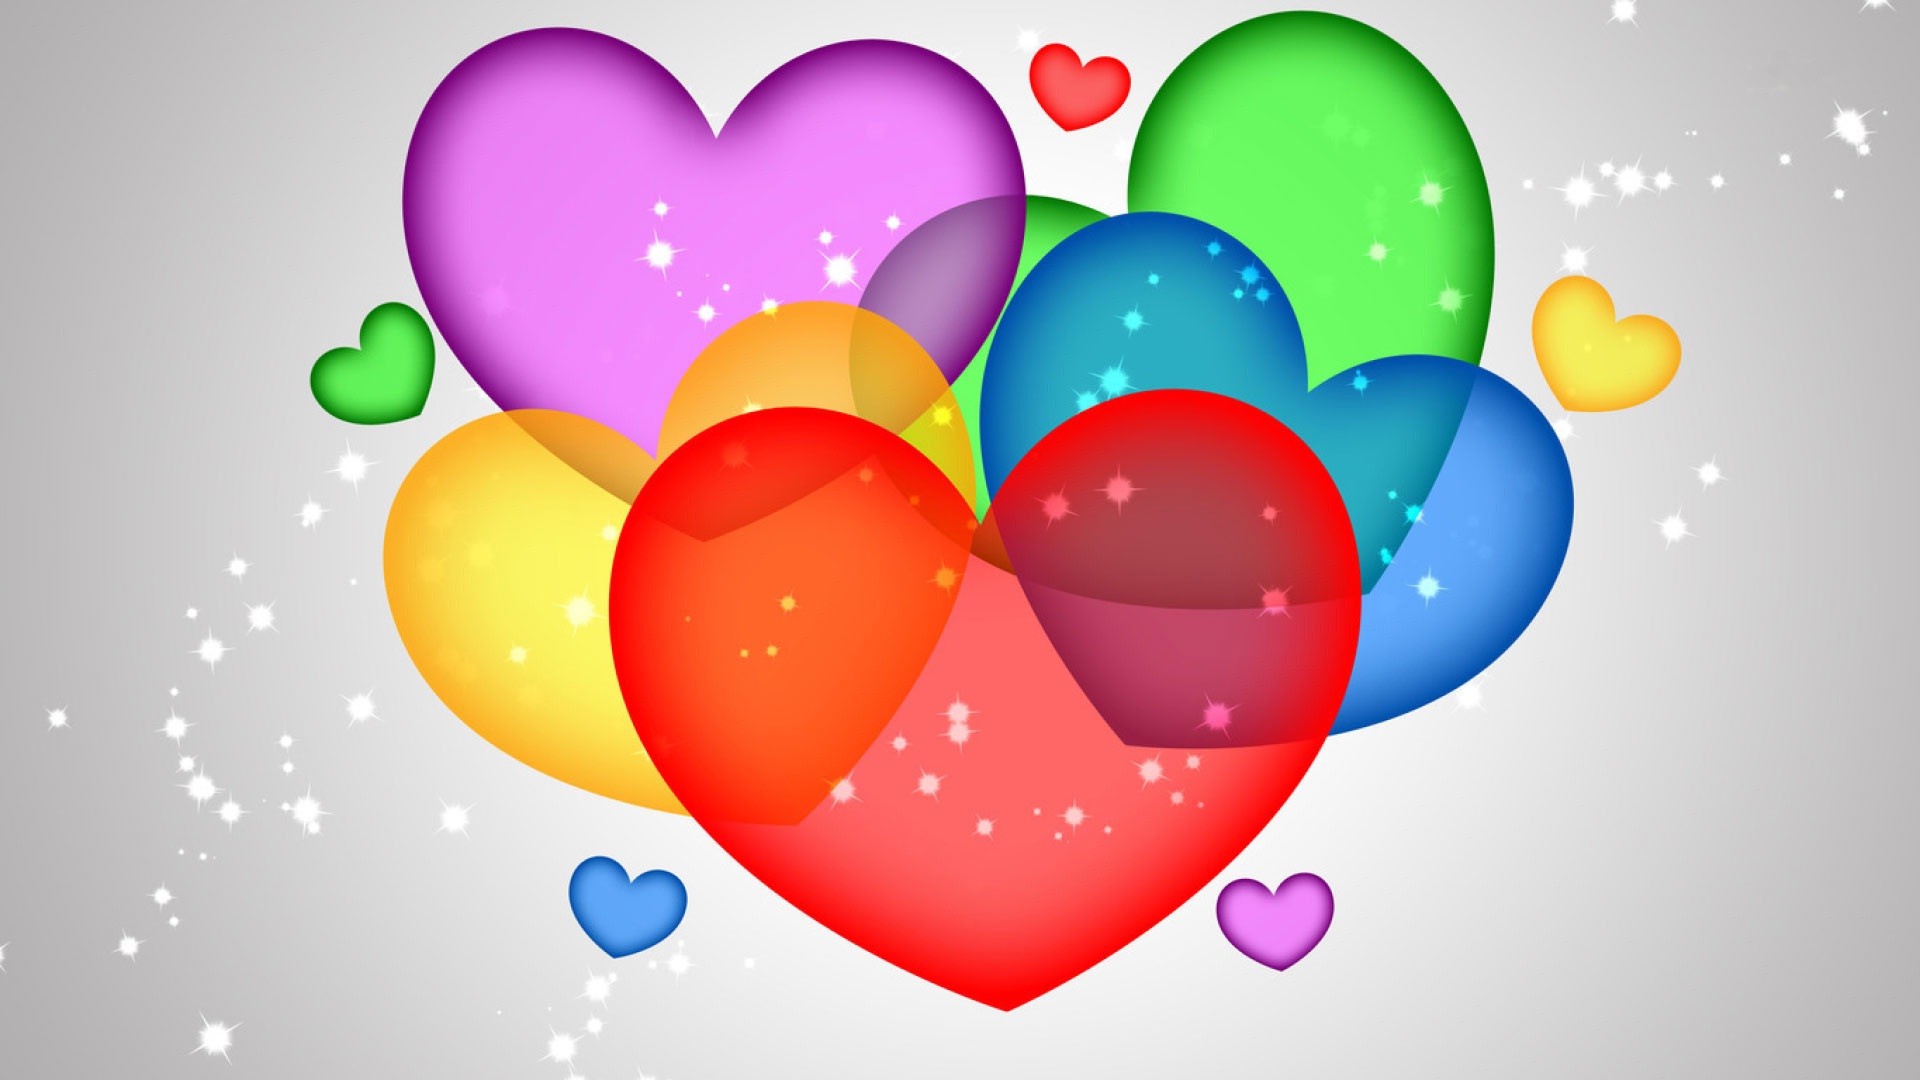 wallpaper related to love,heart,balloon,material property,love,colorfulness